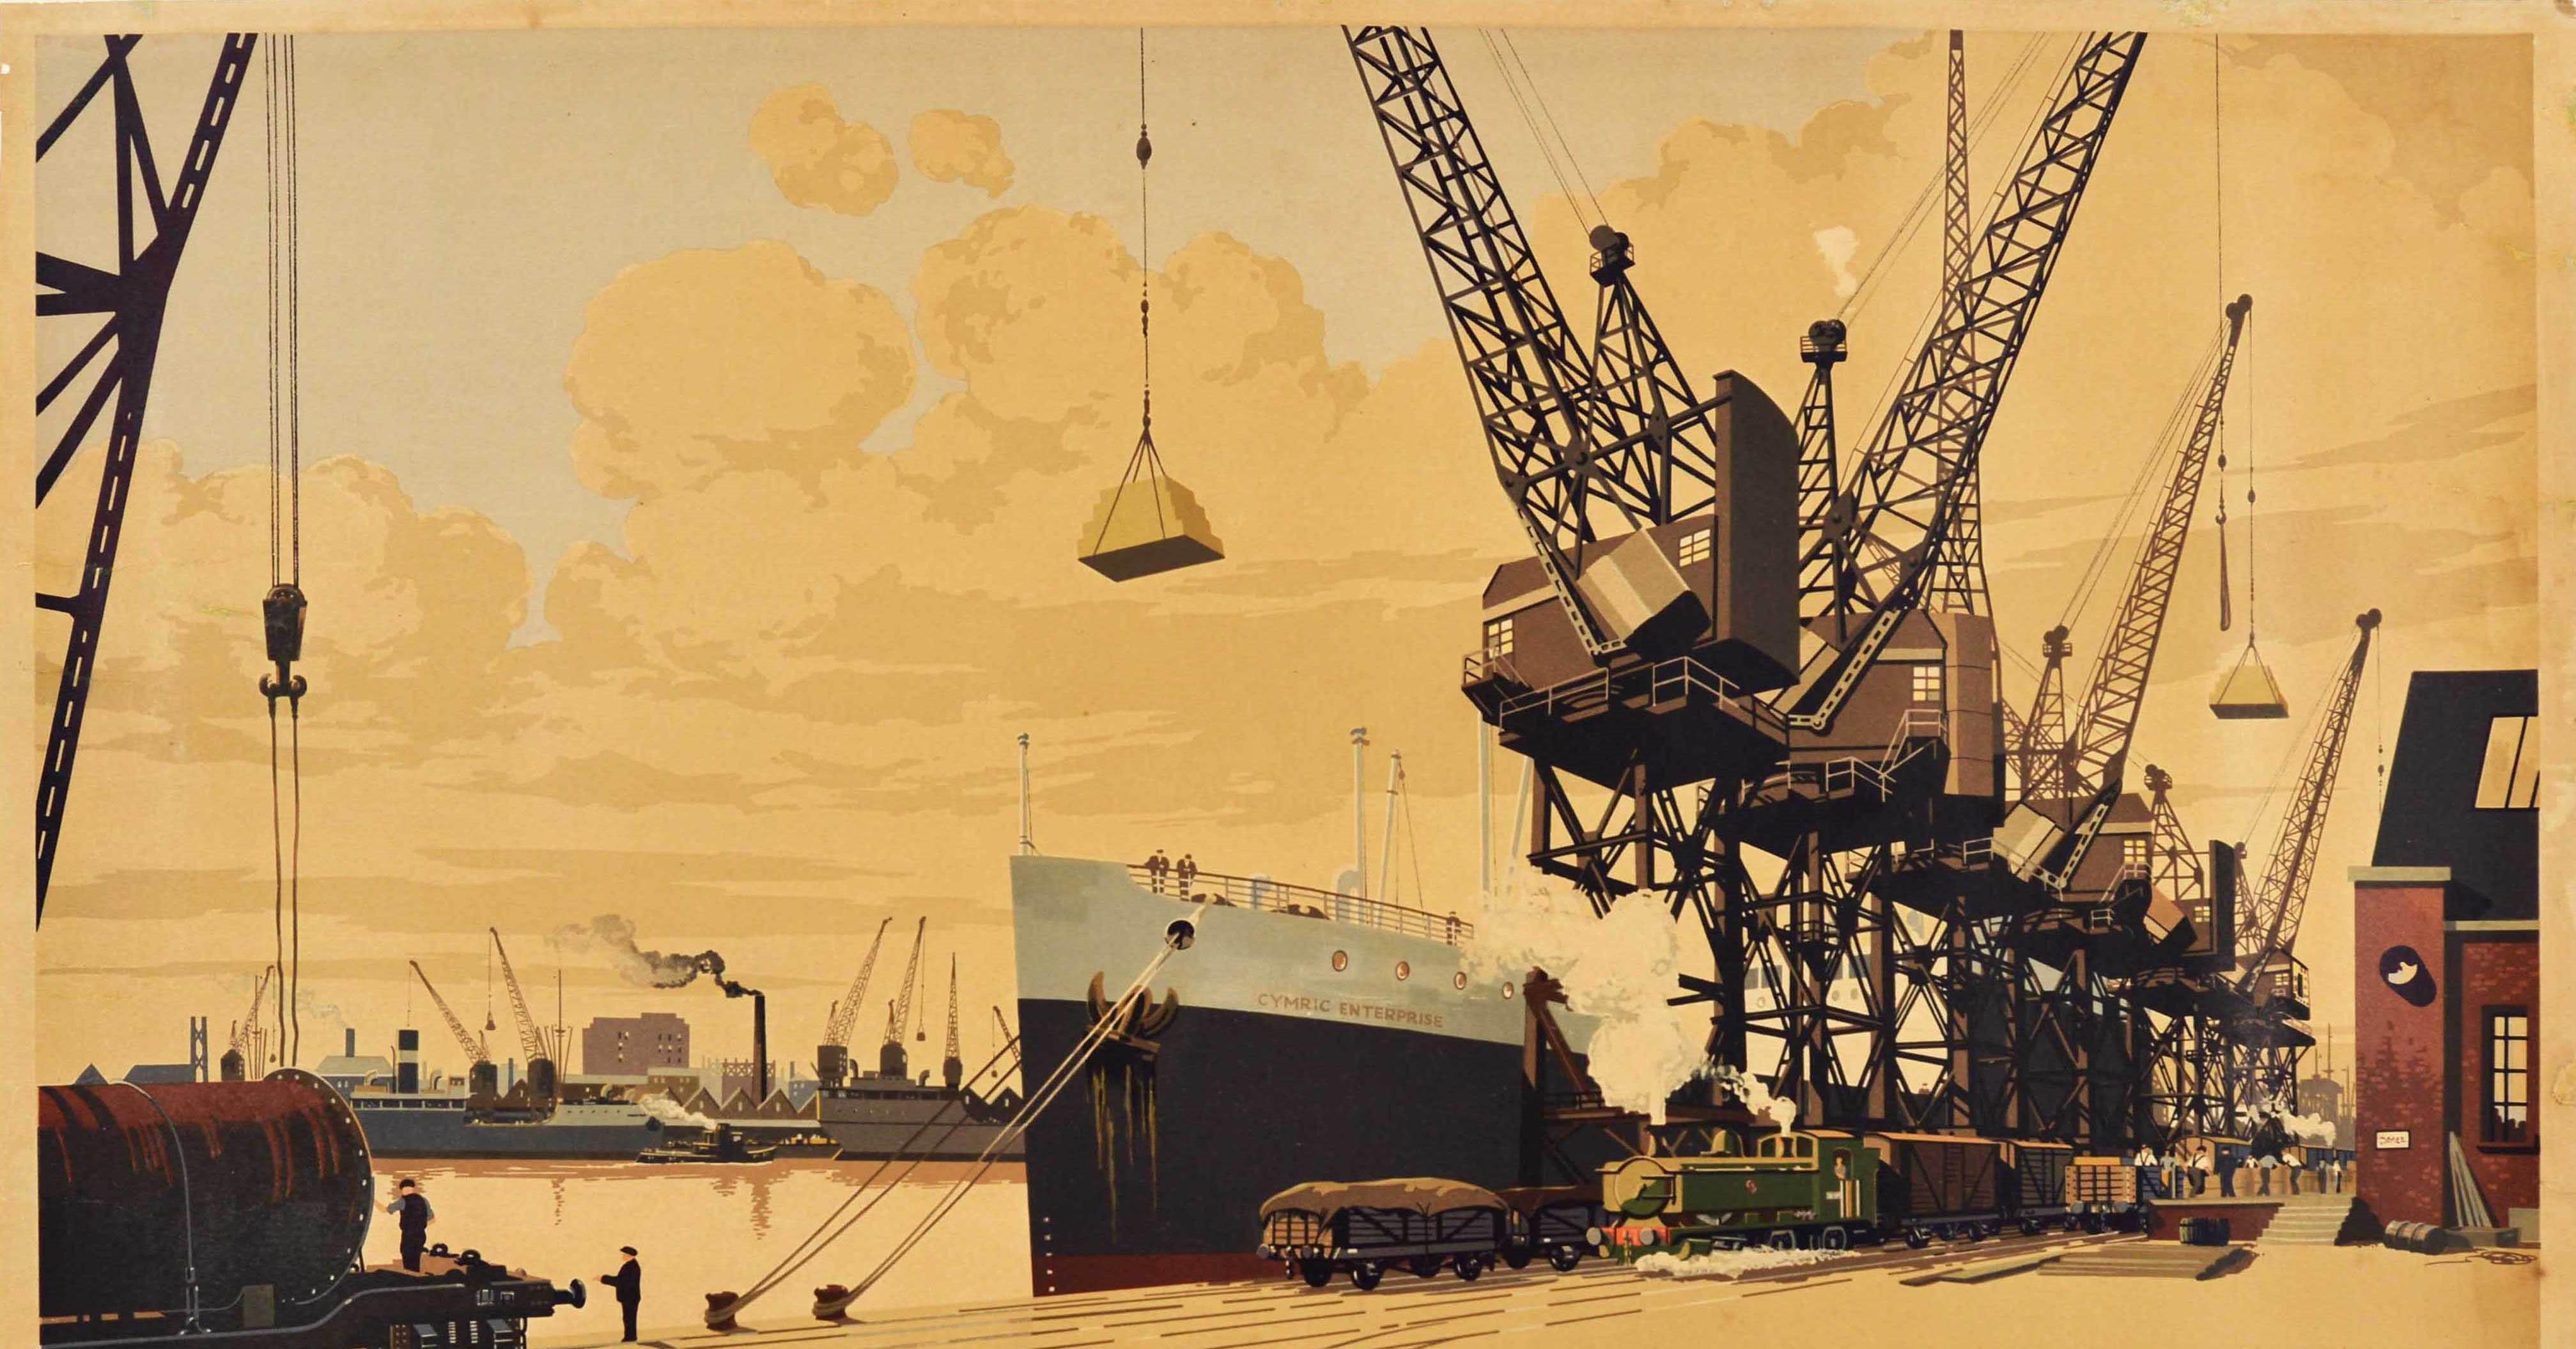 Mid-20th Century Original Vintage British Railways Poster South Wales Docks Industry Cargo Ship For Sale